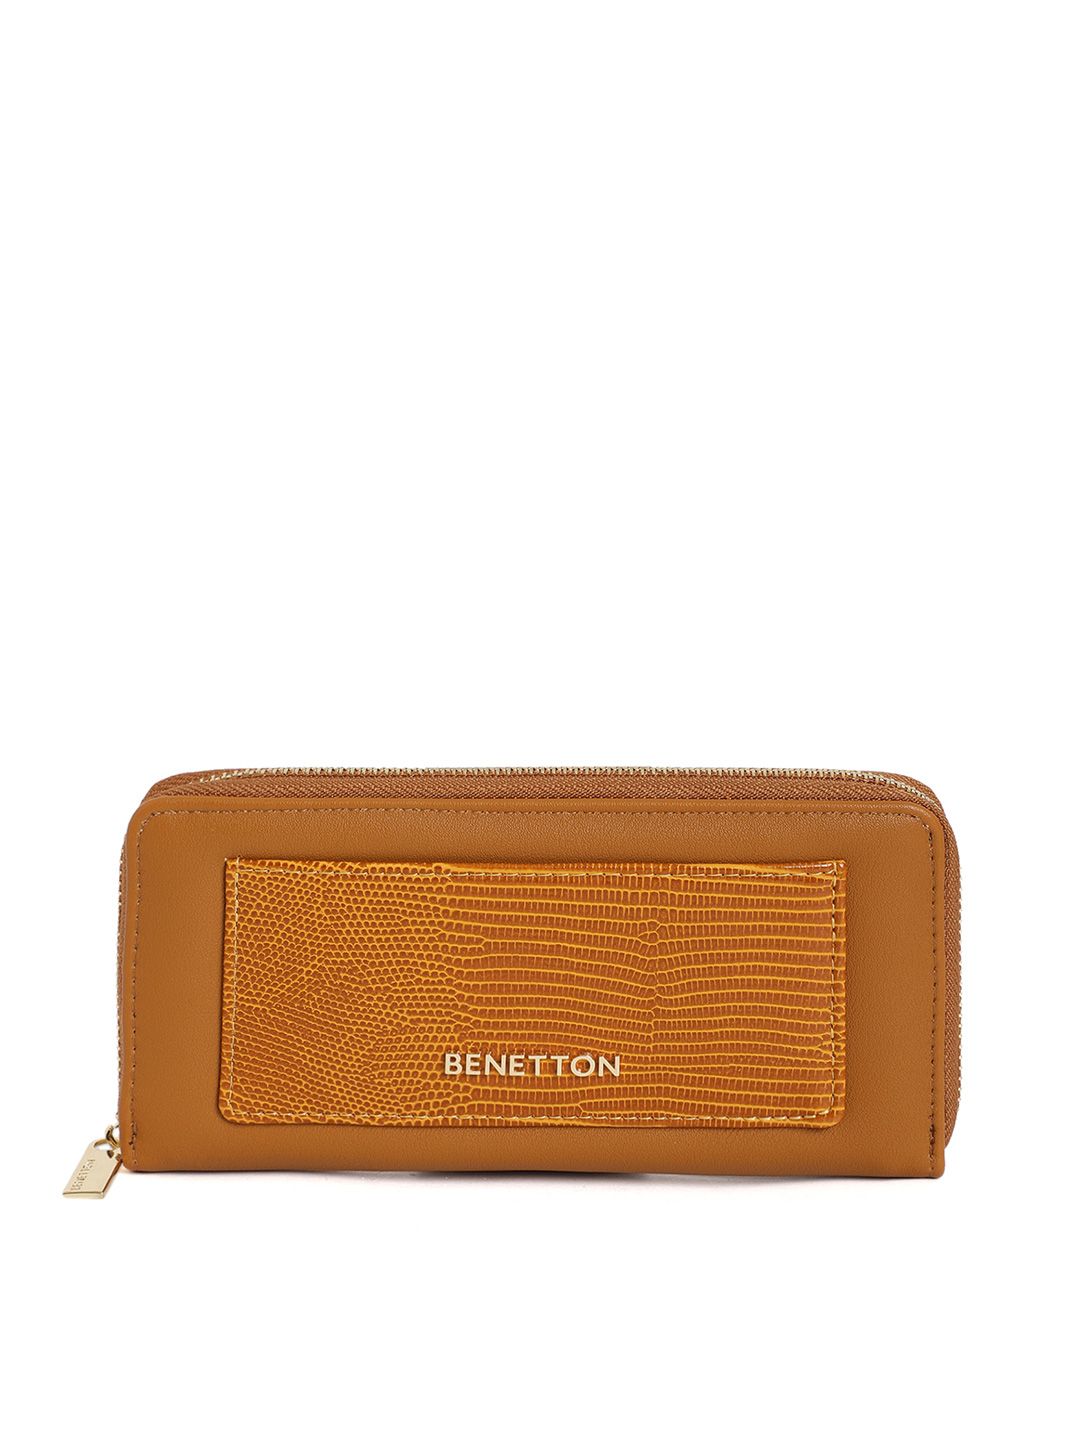 United Colors of Benetton Women Brown Solid Applique Synthetic Leather Zip Around Wallet Price in India